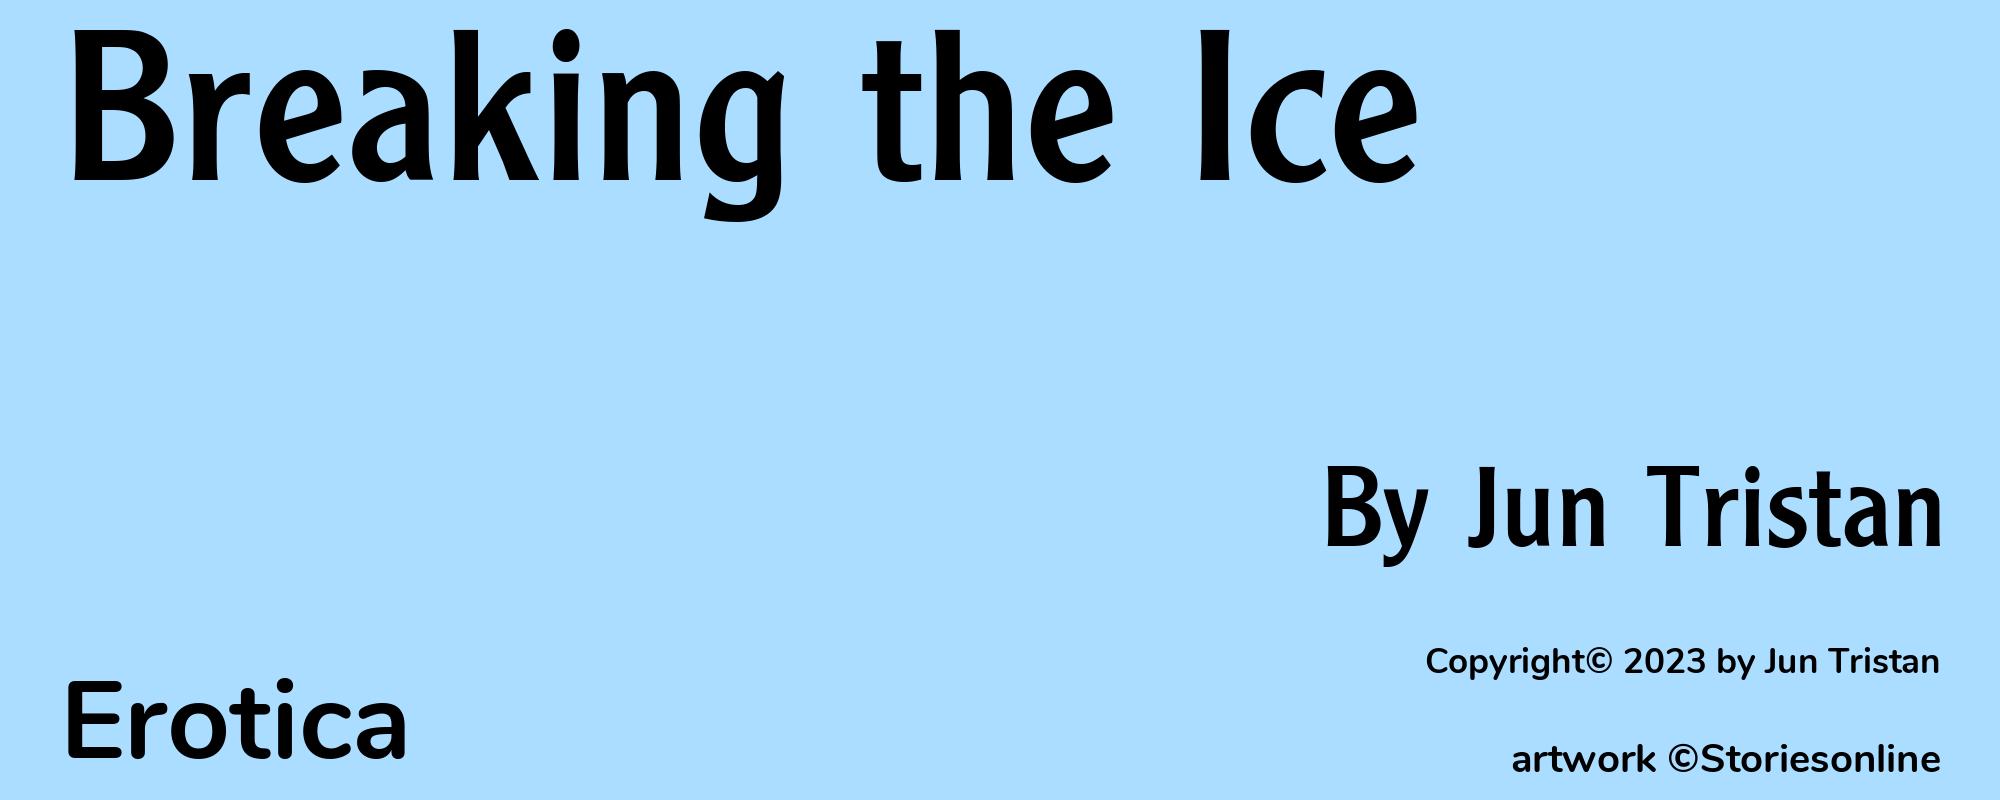 Breaking the Ice - Cover